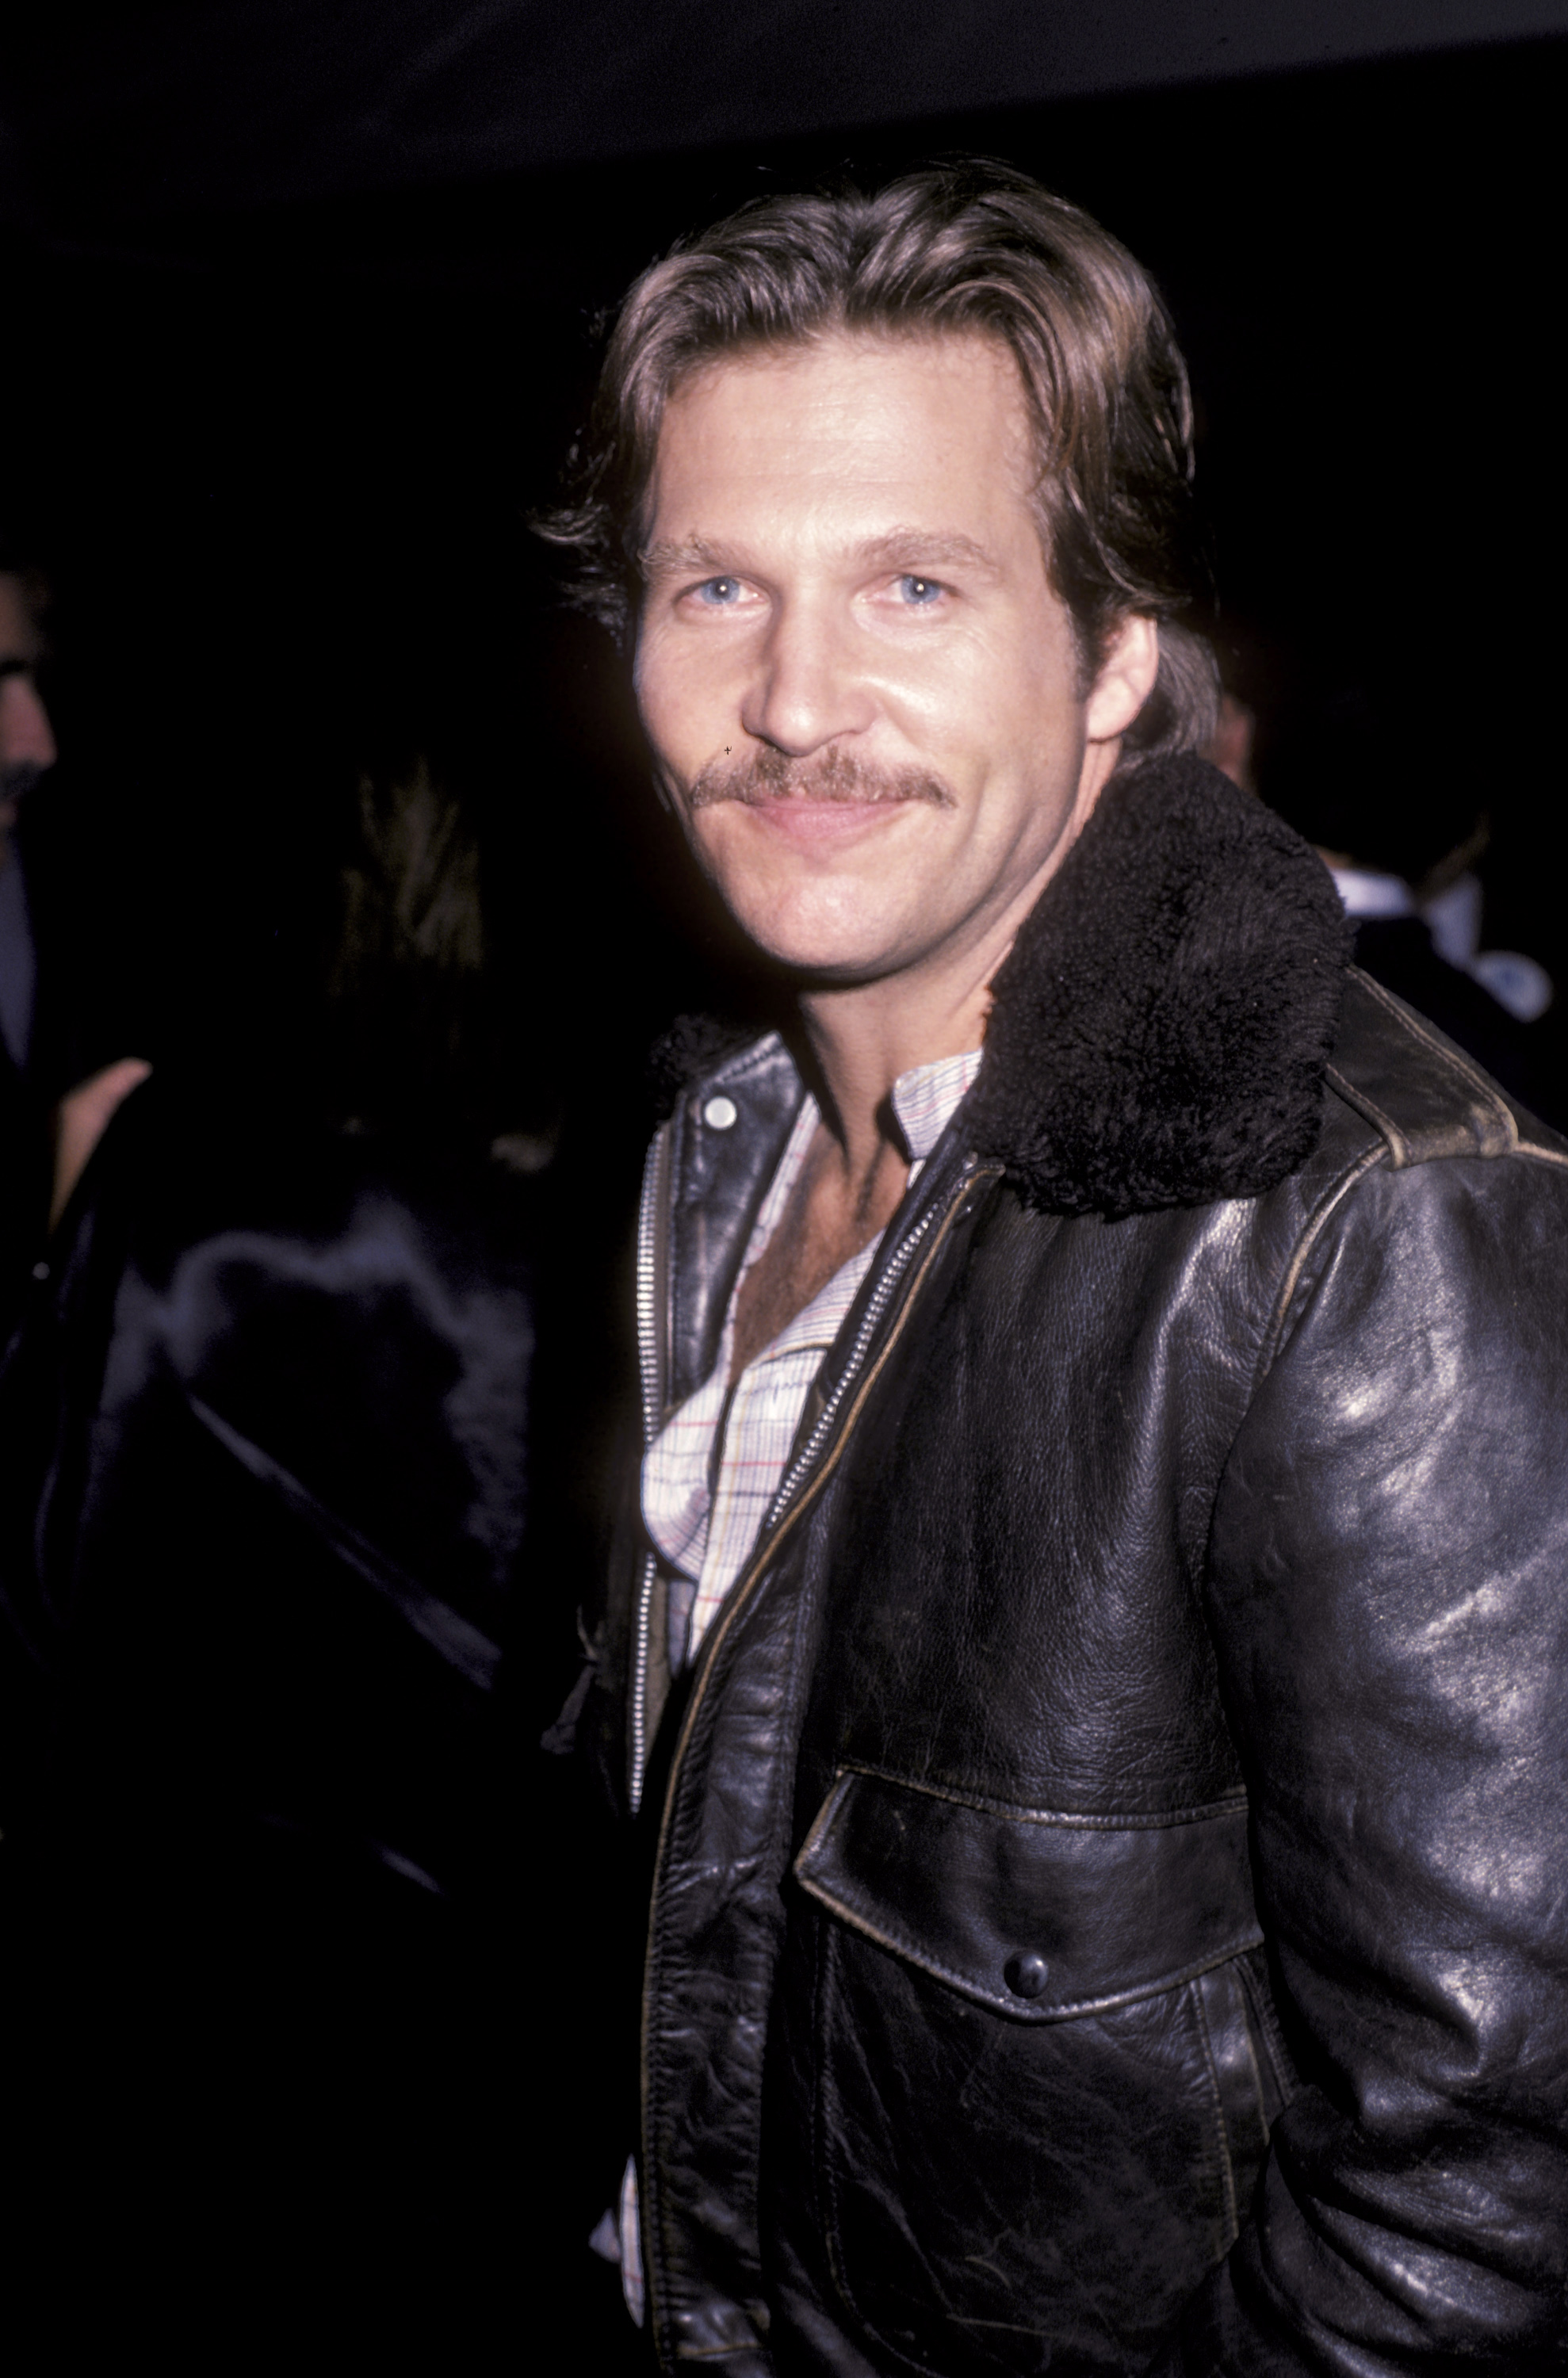 The movie star at the "Jagged Edge" premiere in Beverly Hills, California, on October 1, 1985. | Source: Getty Images